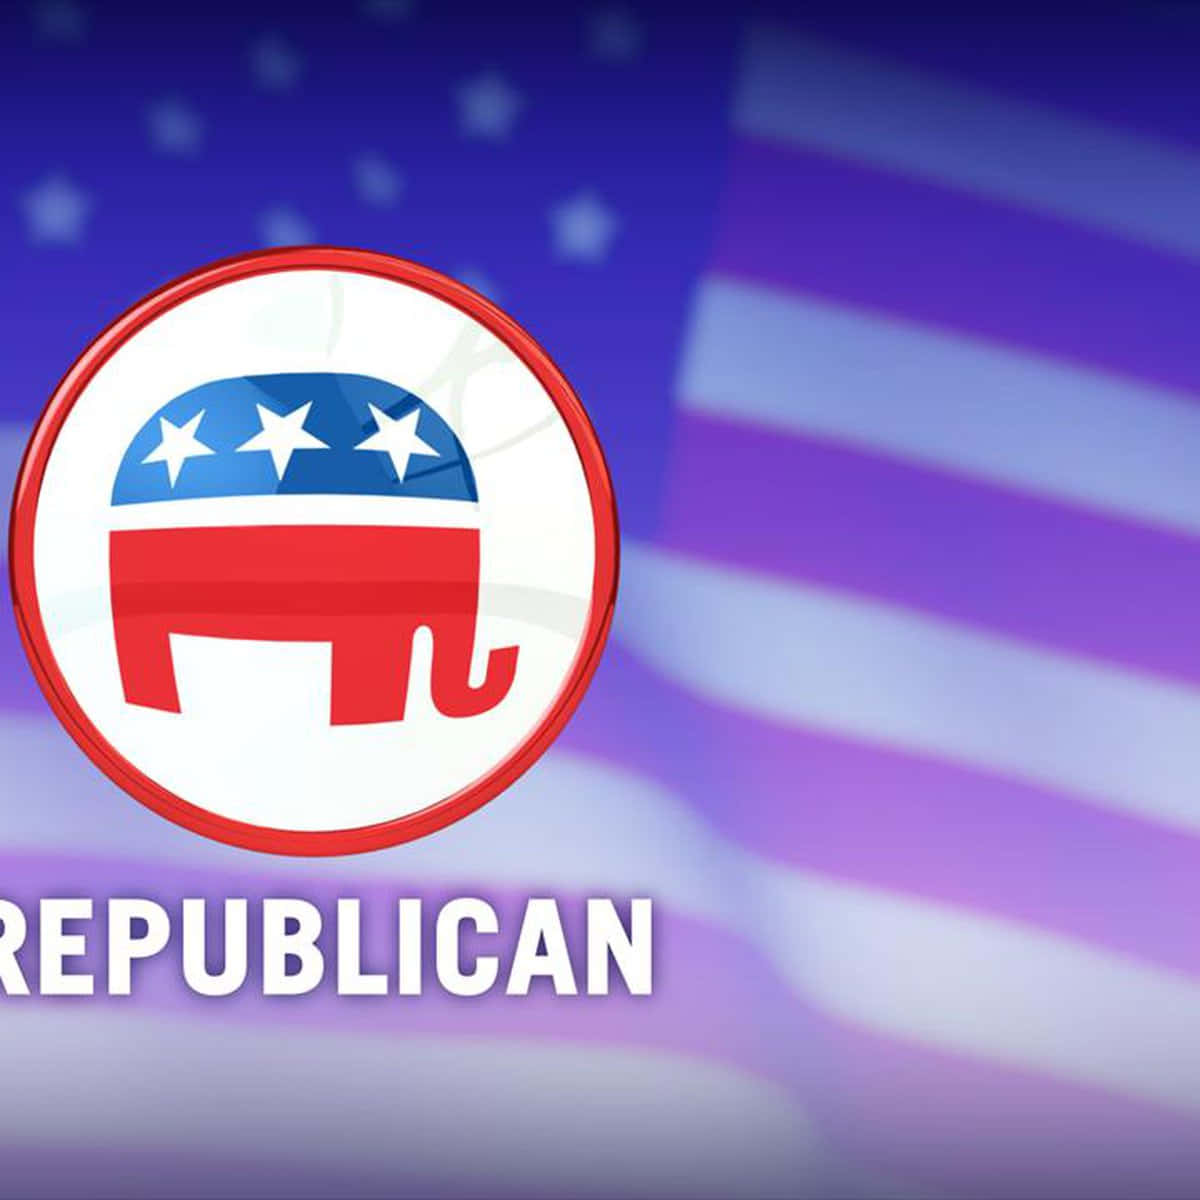 Republican Elephant With US Flag Wallpaper